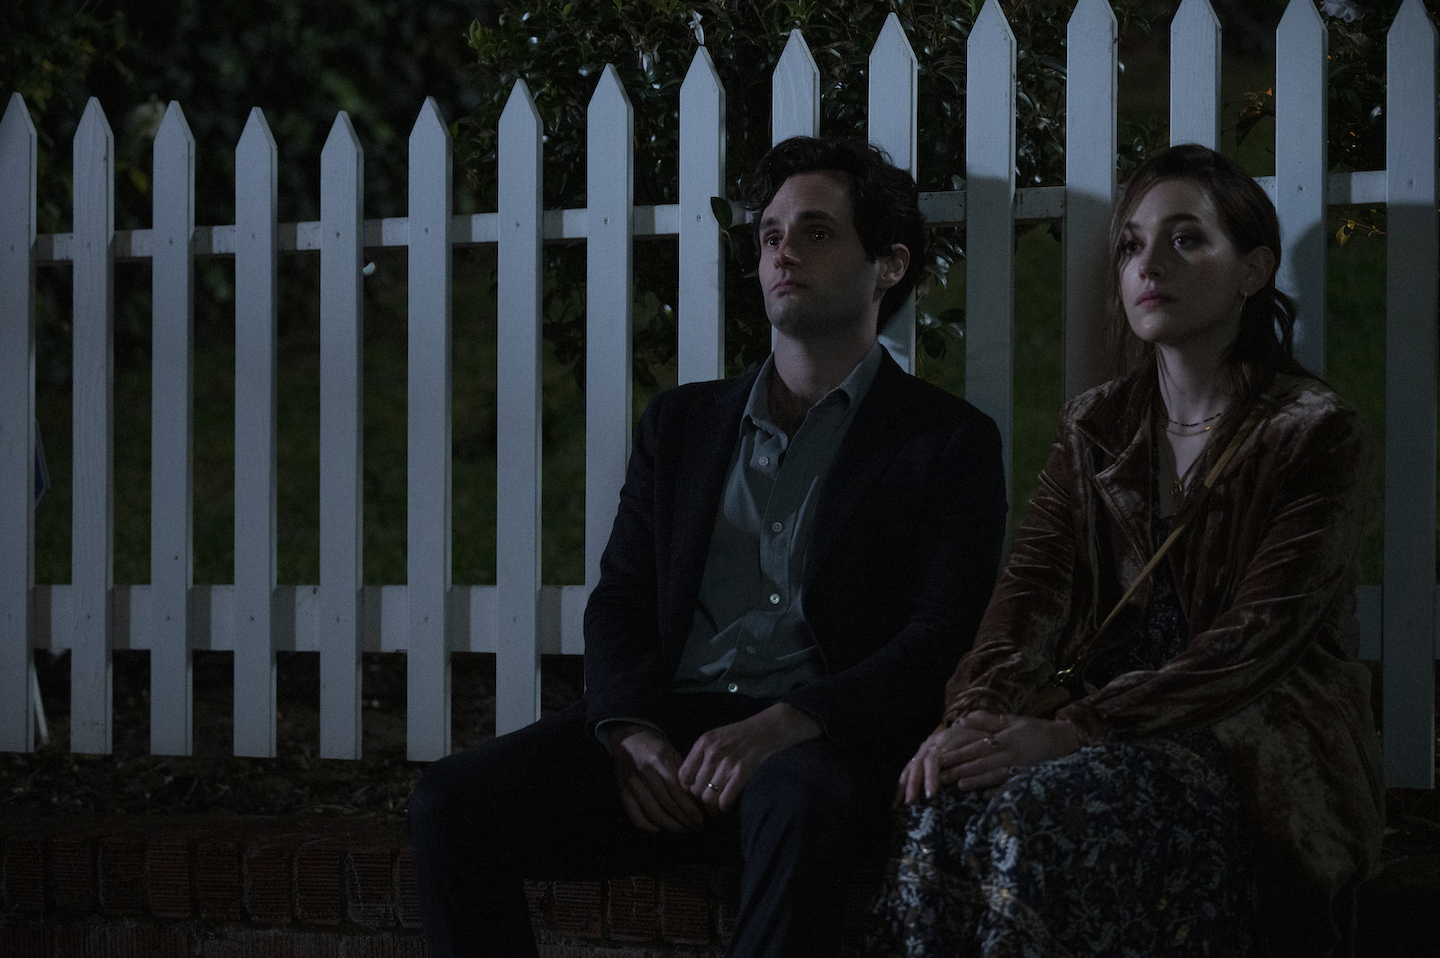 Penn Badgley and Victoria Pedretti, 'You' Season 3 cast members, sitting next to each other outside in the dark